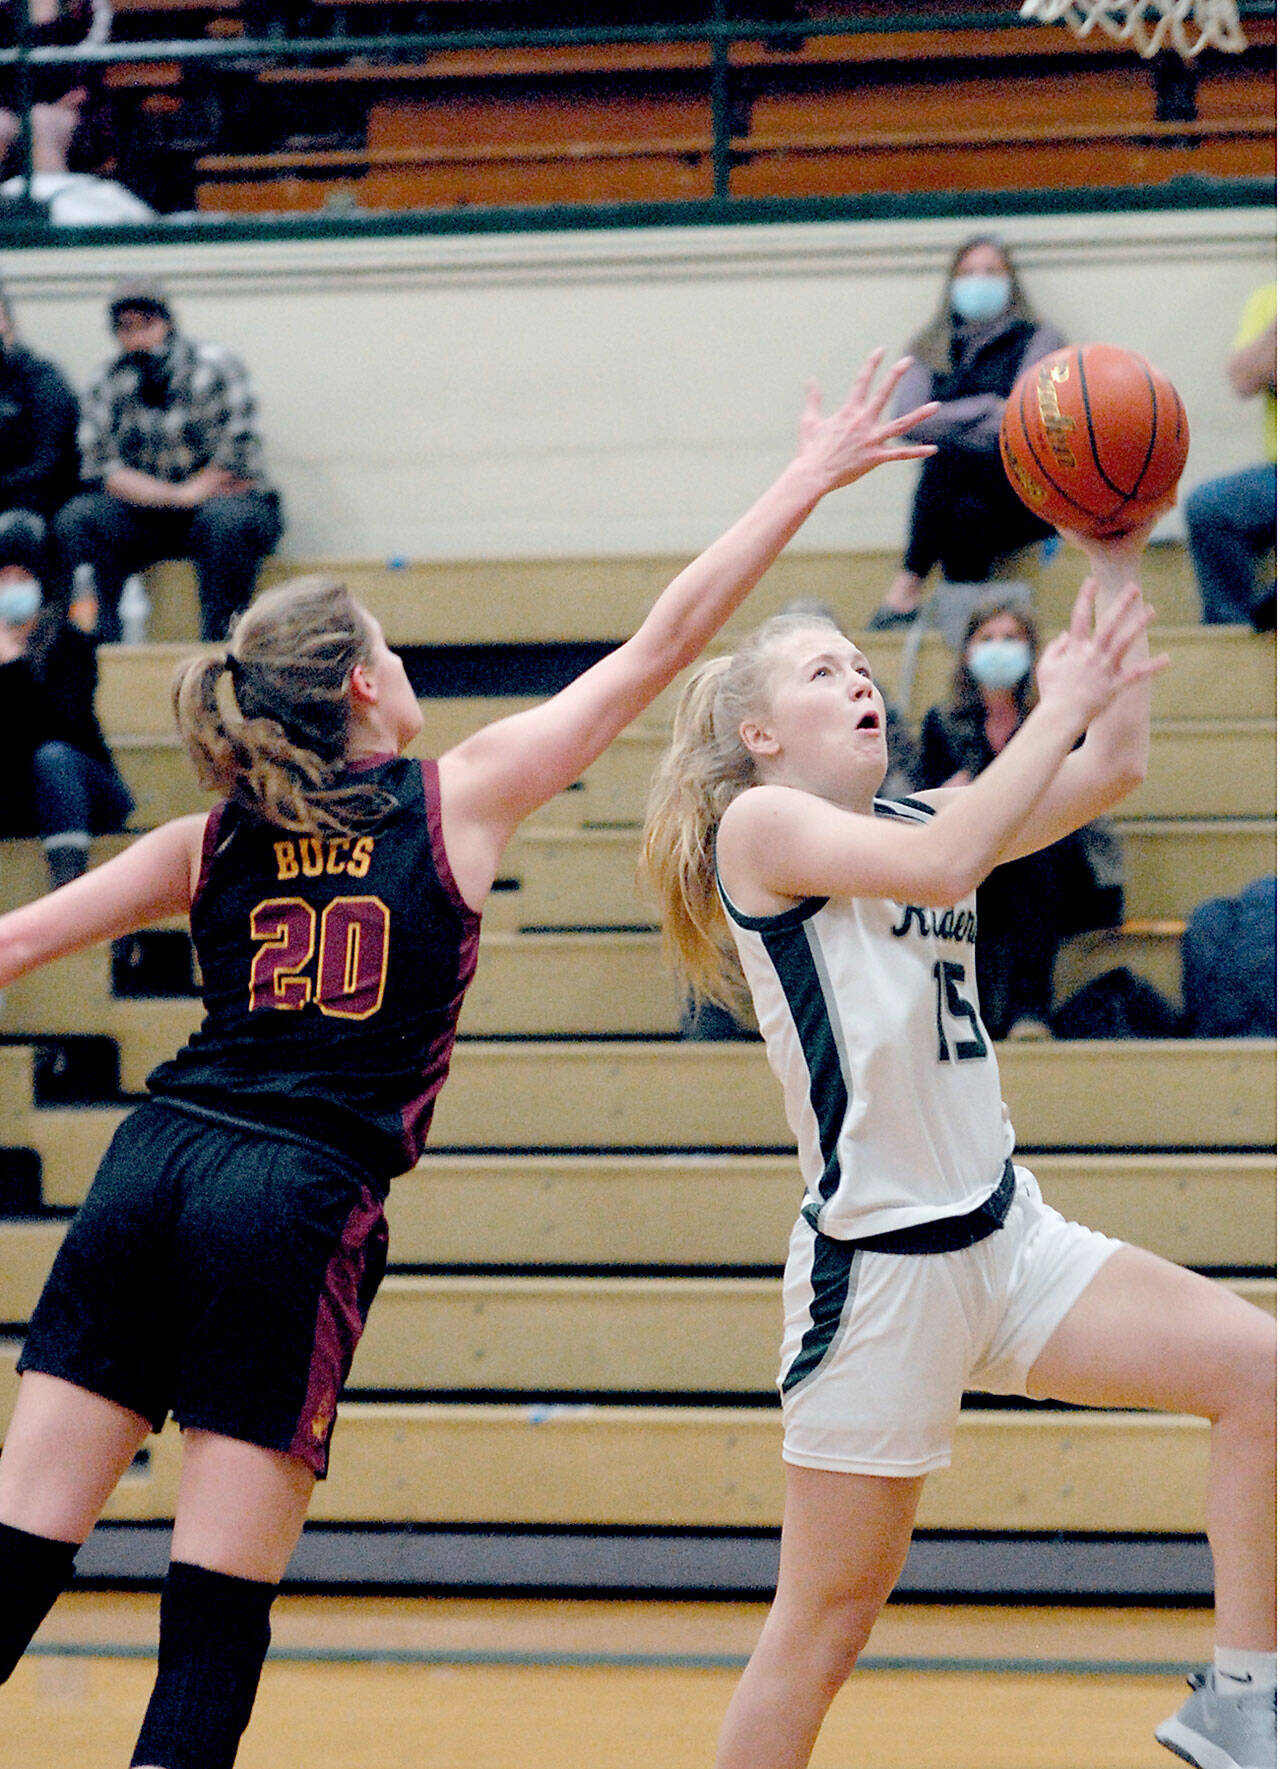 Port Angeles’ Paige Mason, right, looks of the layup as Kingston’s Ellee Brockman defends the lane on Thursday night at Port Angeles High School. (Keith Thorpe/Peninsula Daily News)